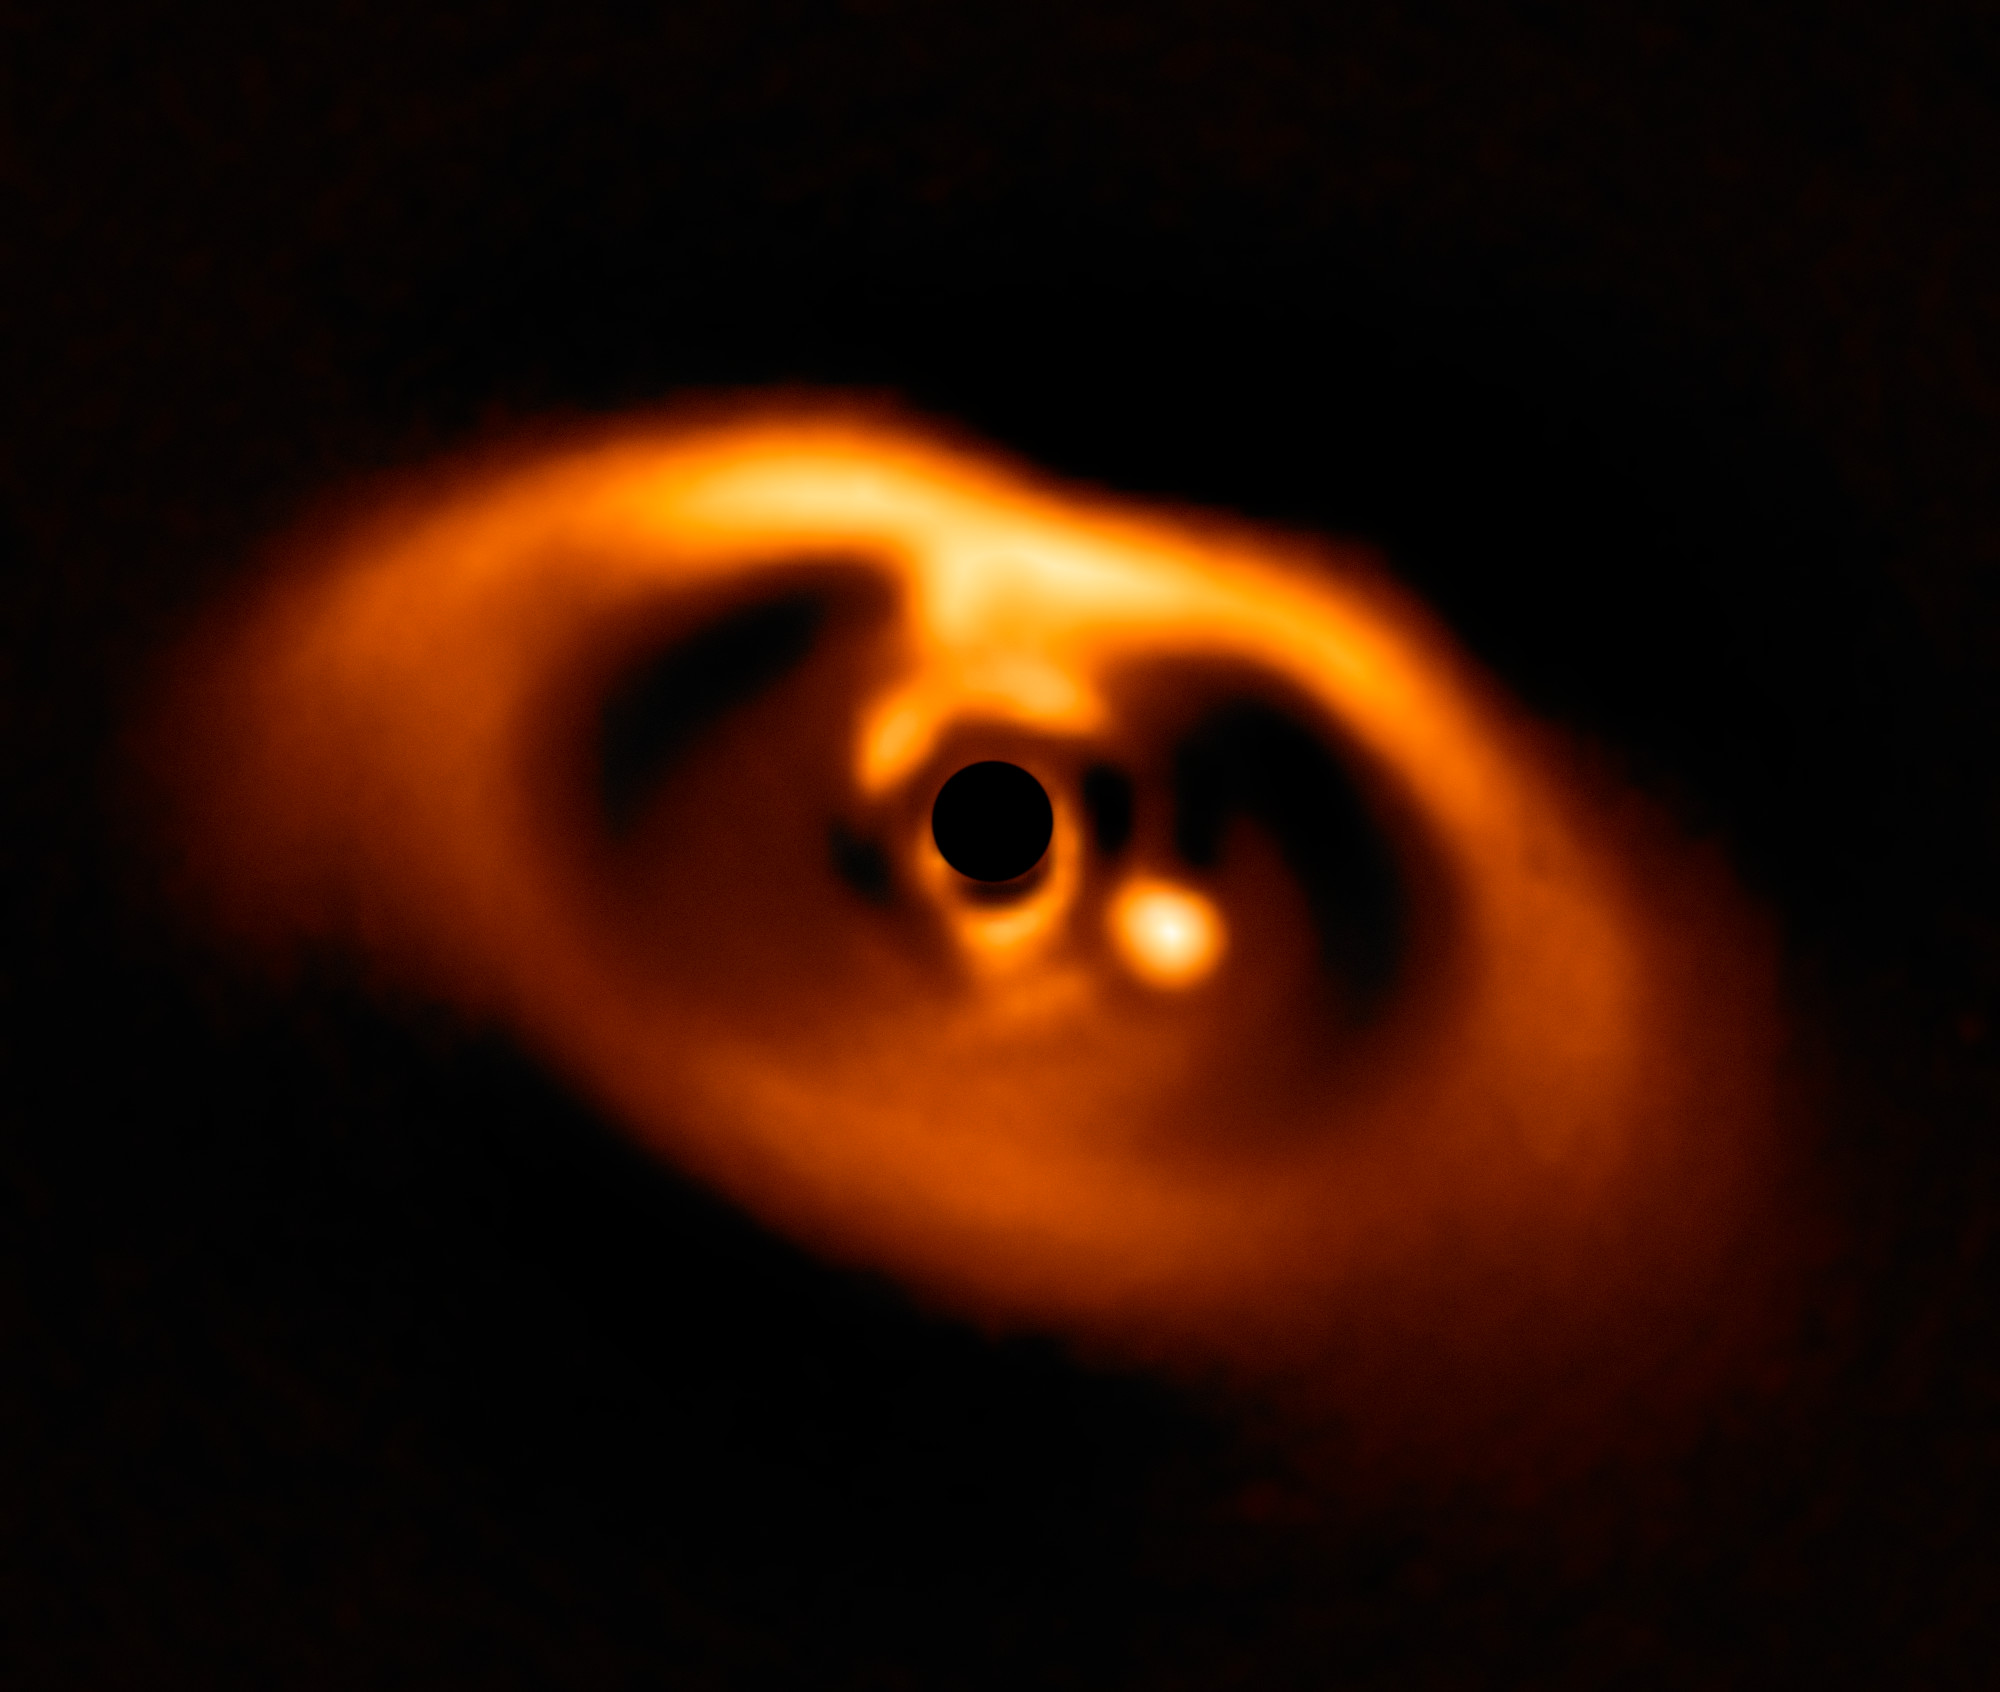 PDS 70 is approximately 370 light-years away and features a large gap in its inner ring.